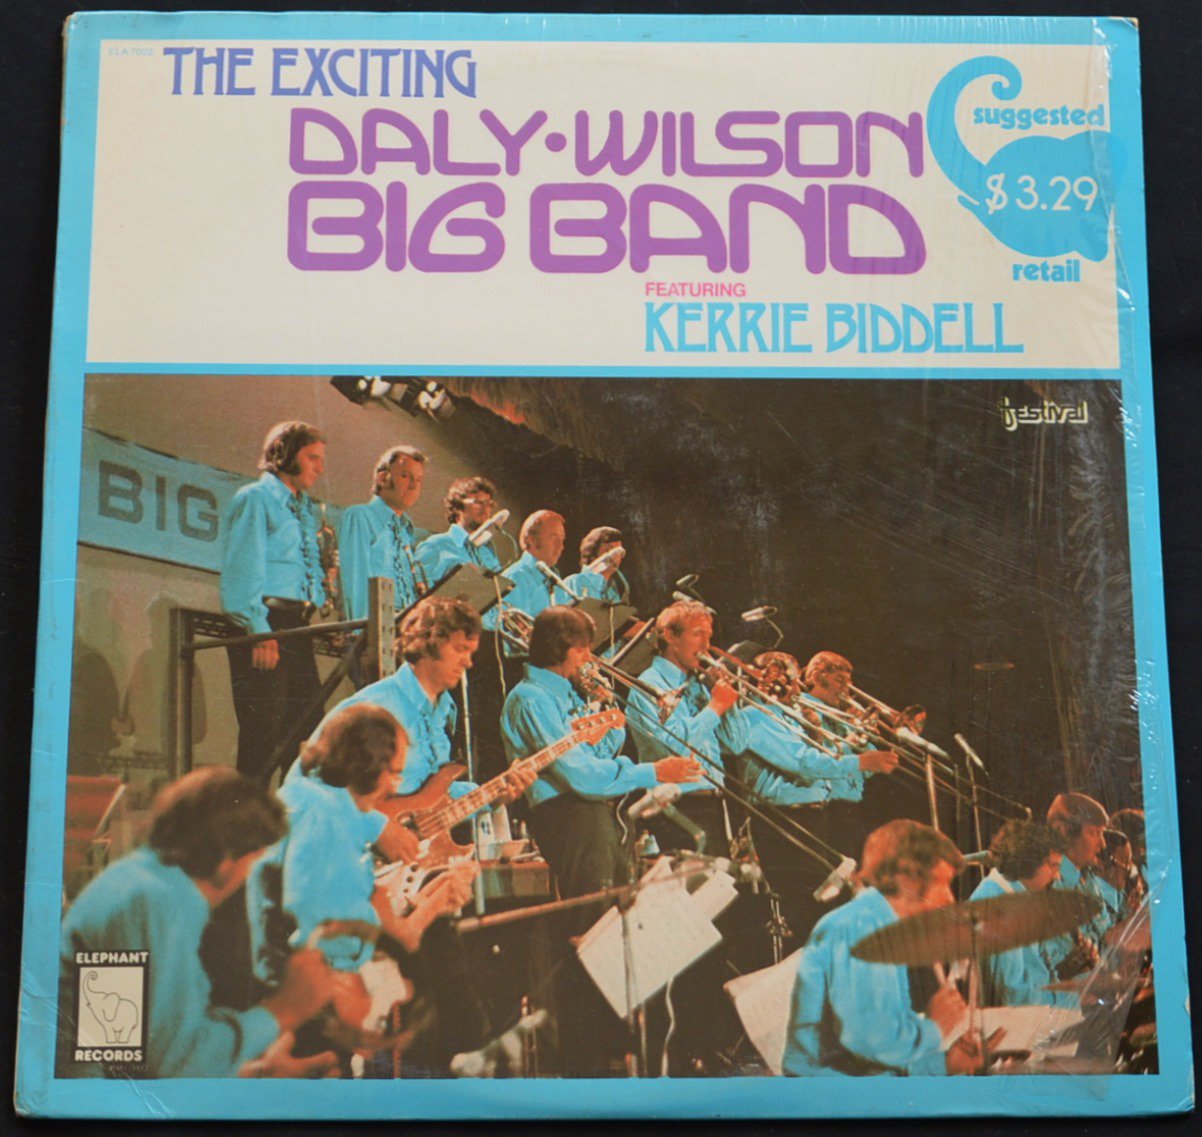 DALY-WILSON BIG BAND FEATURING KERRIE BIDDELL / THE EXCITING DALY-WILSON BIG BAND (LP)